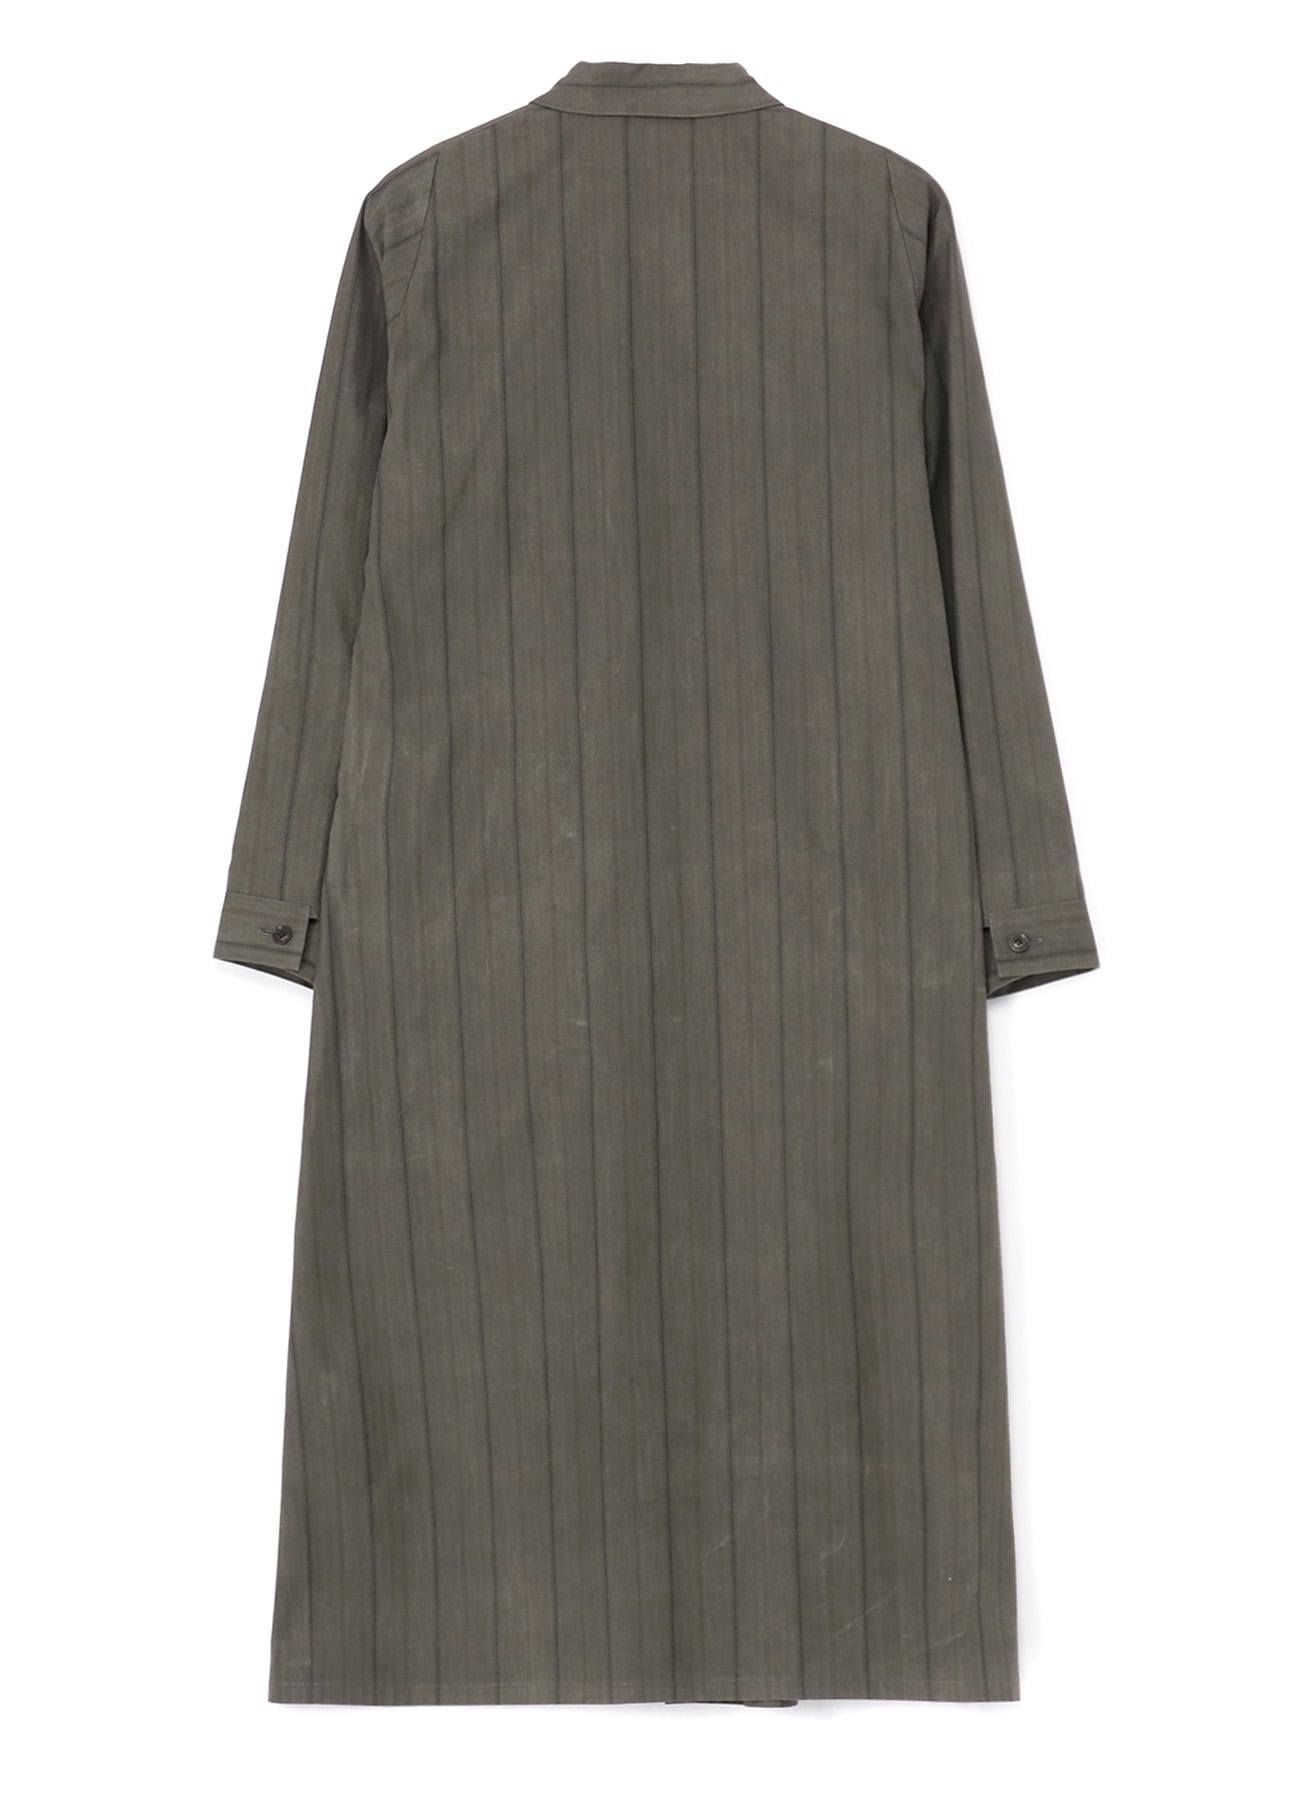 COTTON STRIPE INK DYED CHEST POCKET DRESS(XS Grey): Y's｜THE SHOP 